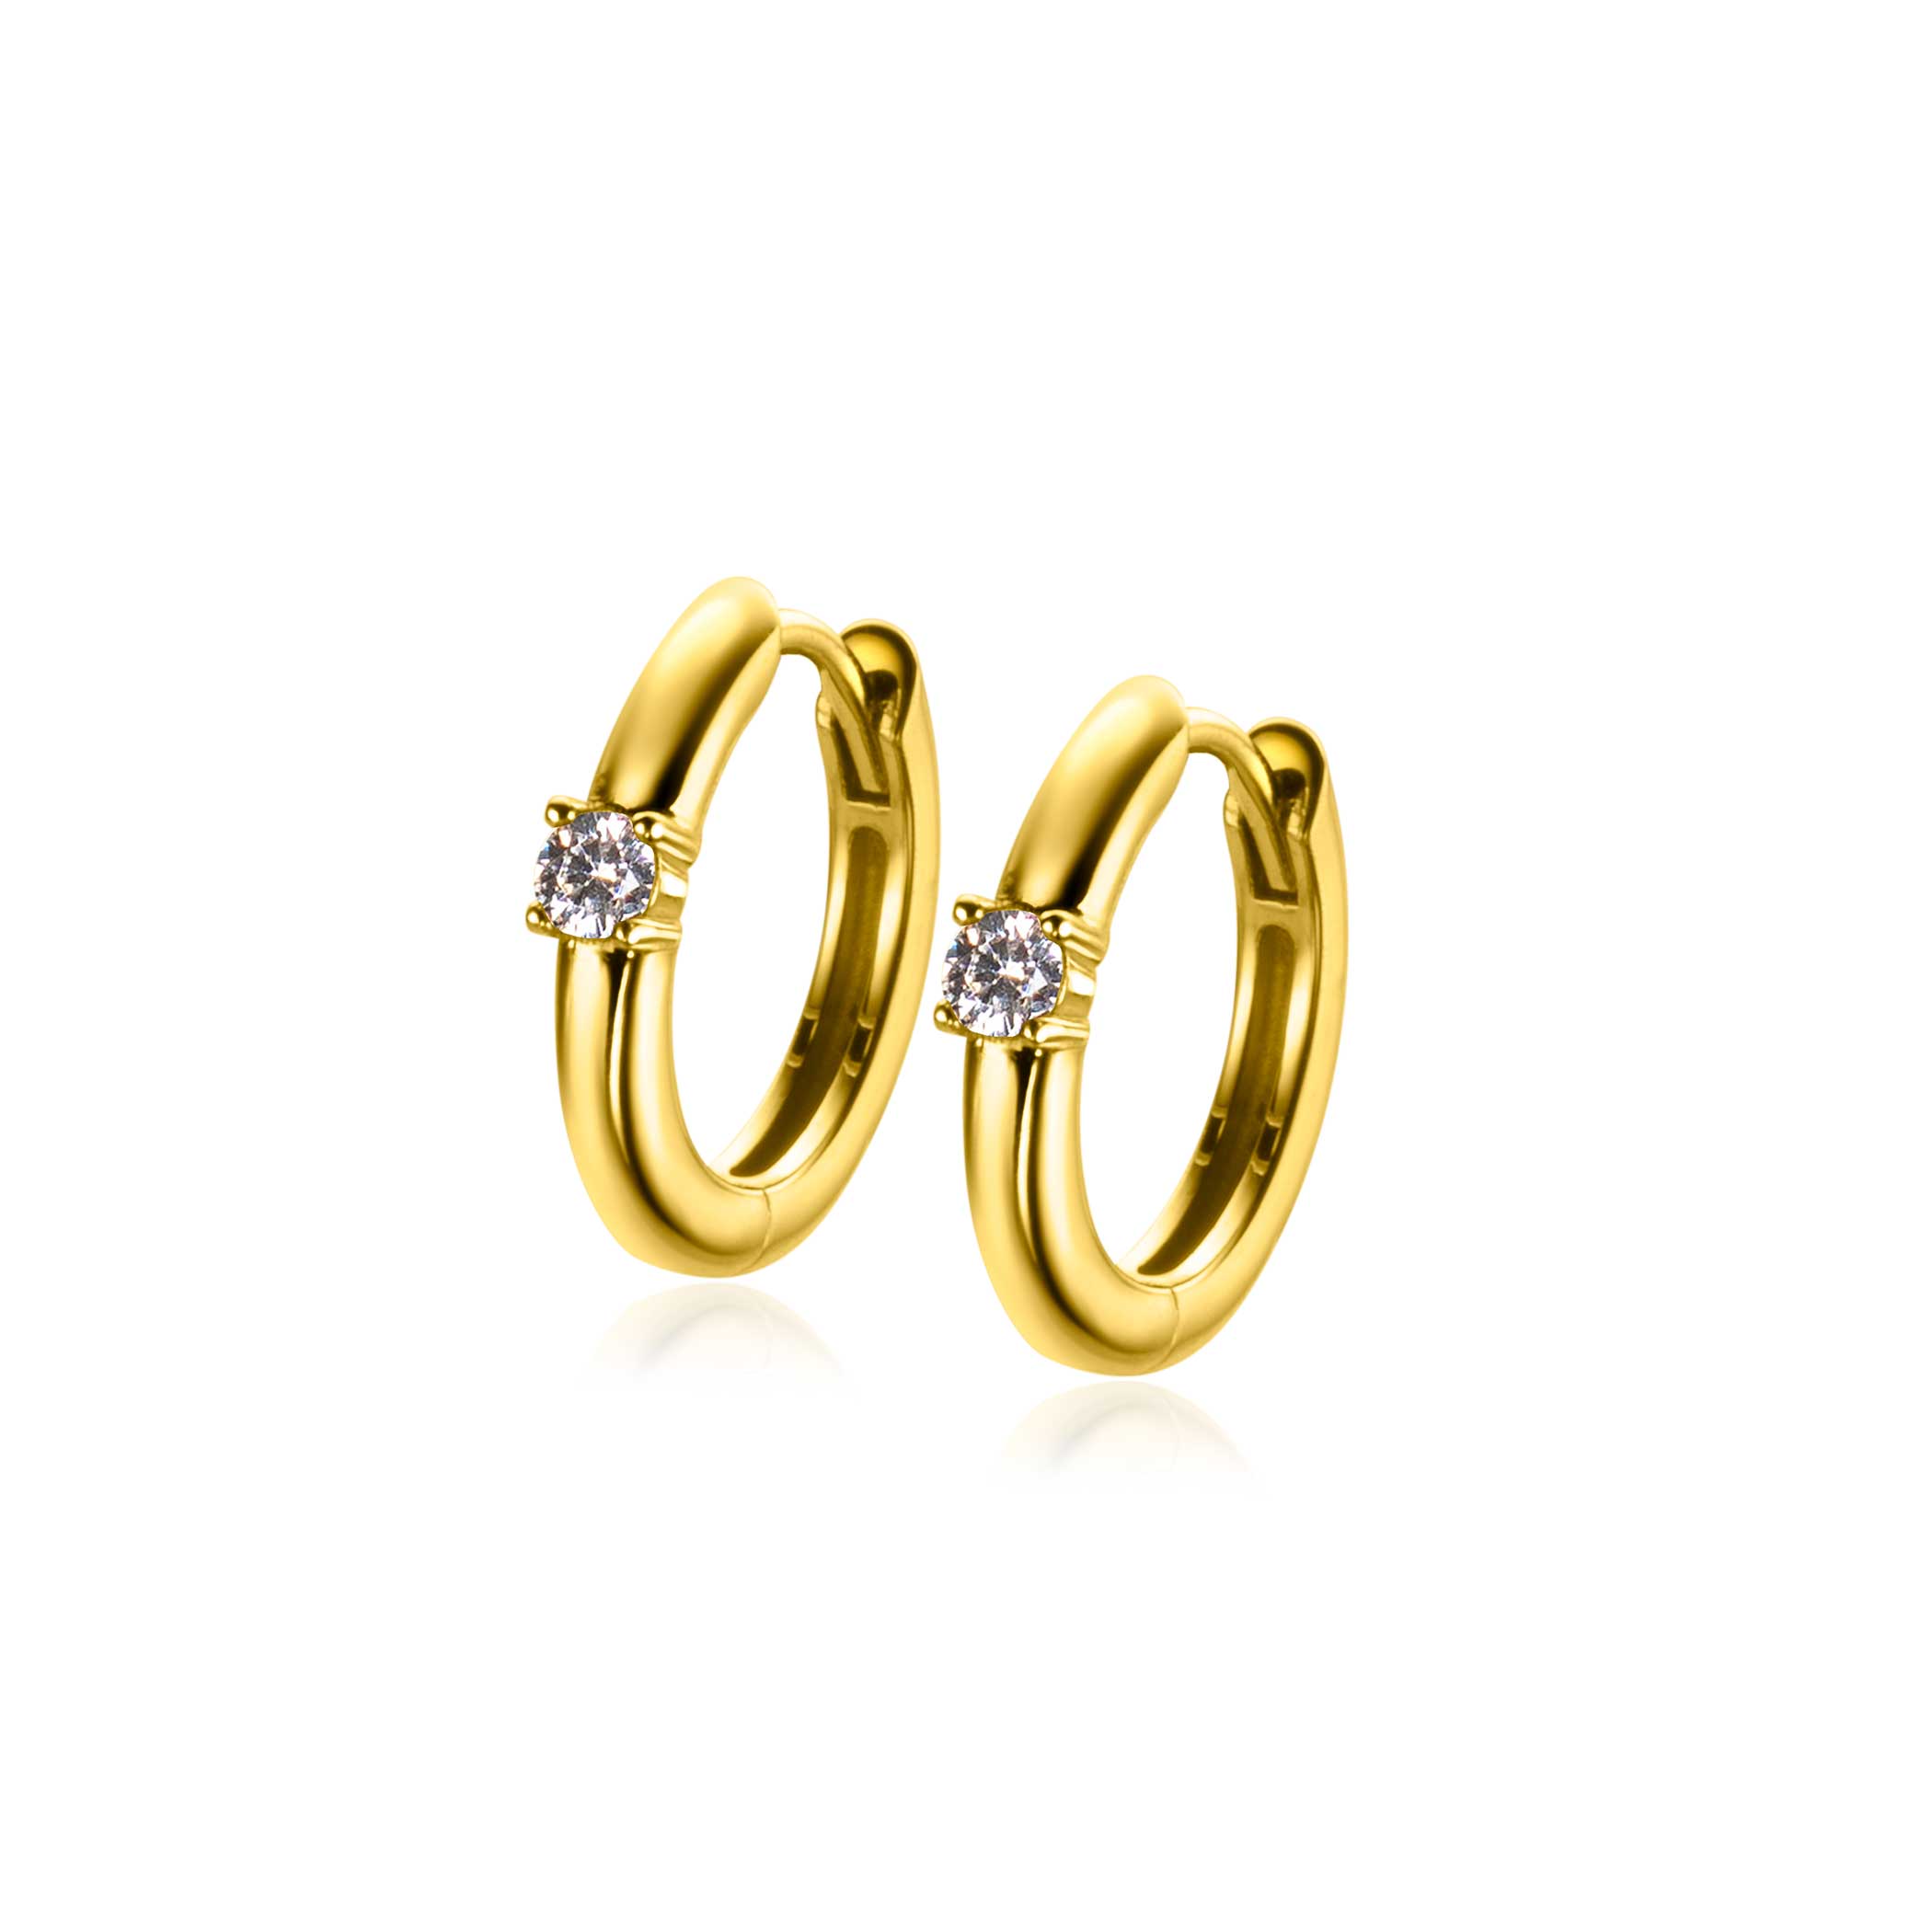 APRIL Hoop Earrings 13mm Gold Plated with Birthstone Diamond White Zirconia